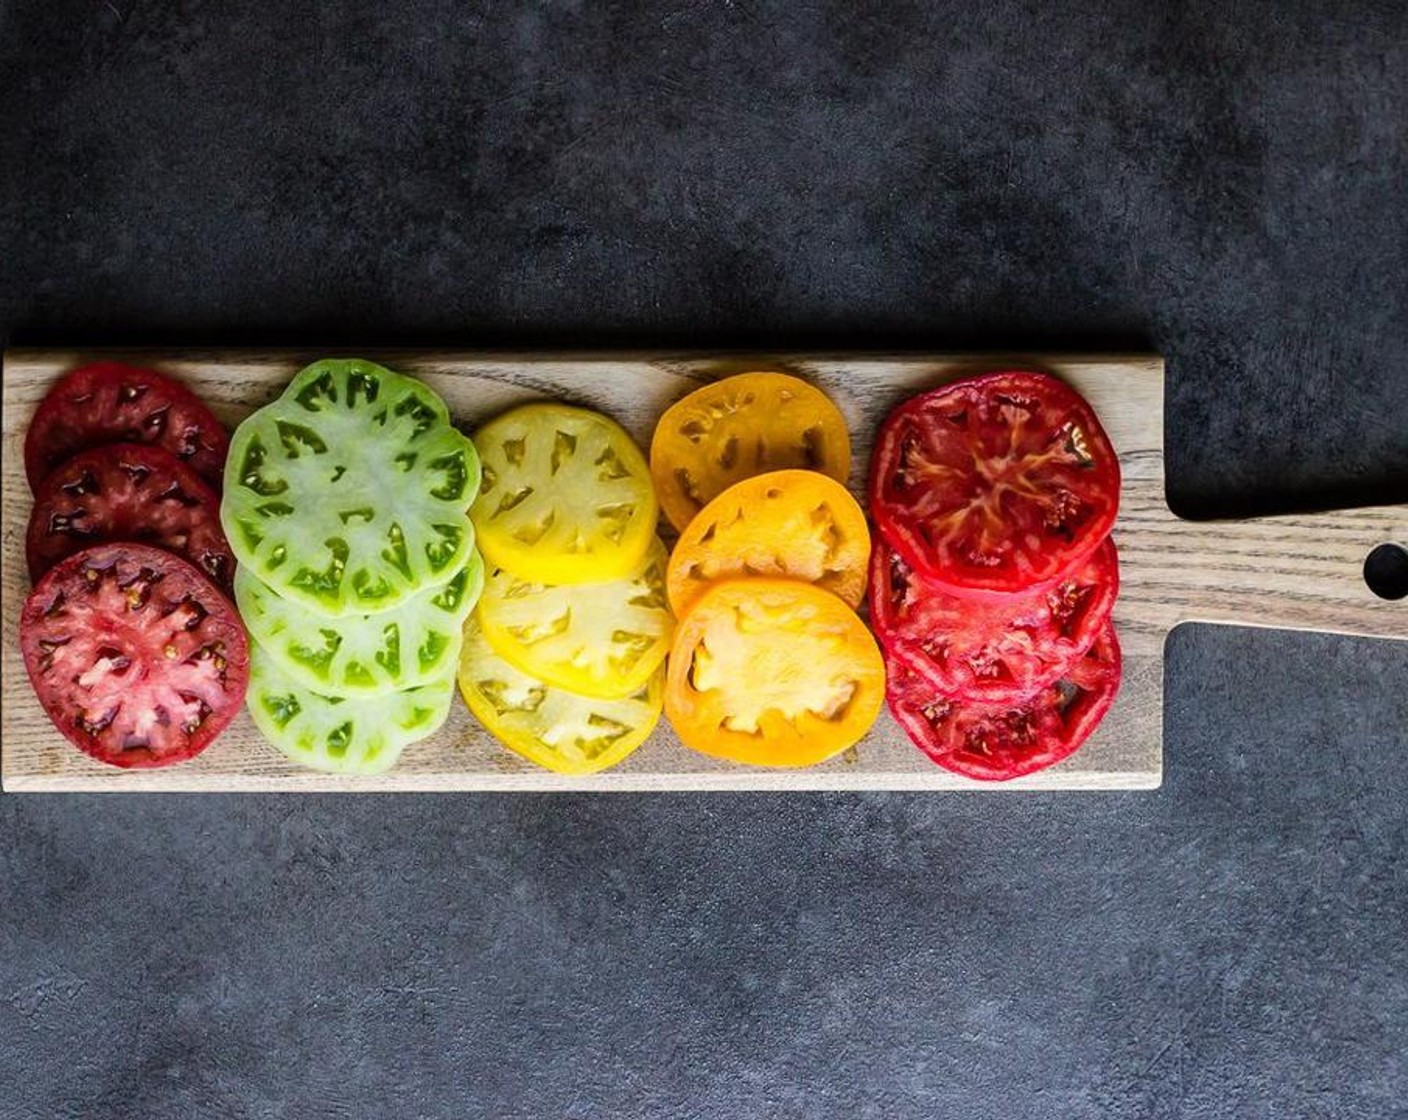 step 4 While the pastry bakes, slice your Heirloom Tomatoes (to taste) into 1/4 inch slices, you will need 3-4 slices of each color, depending on the size of your tomatoes.